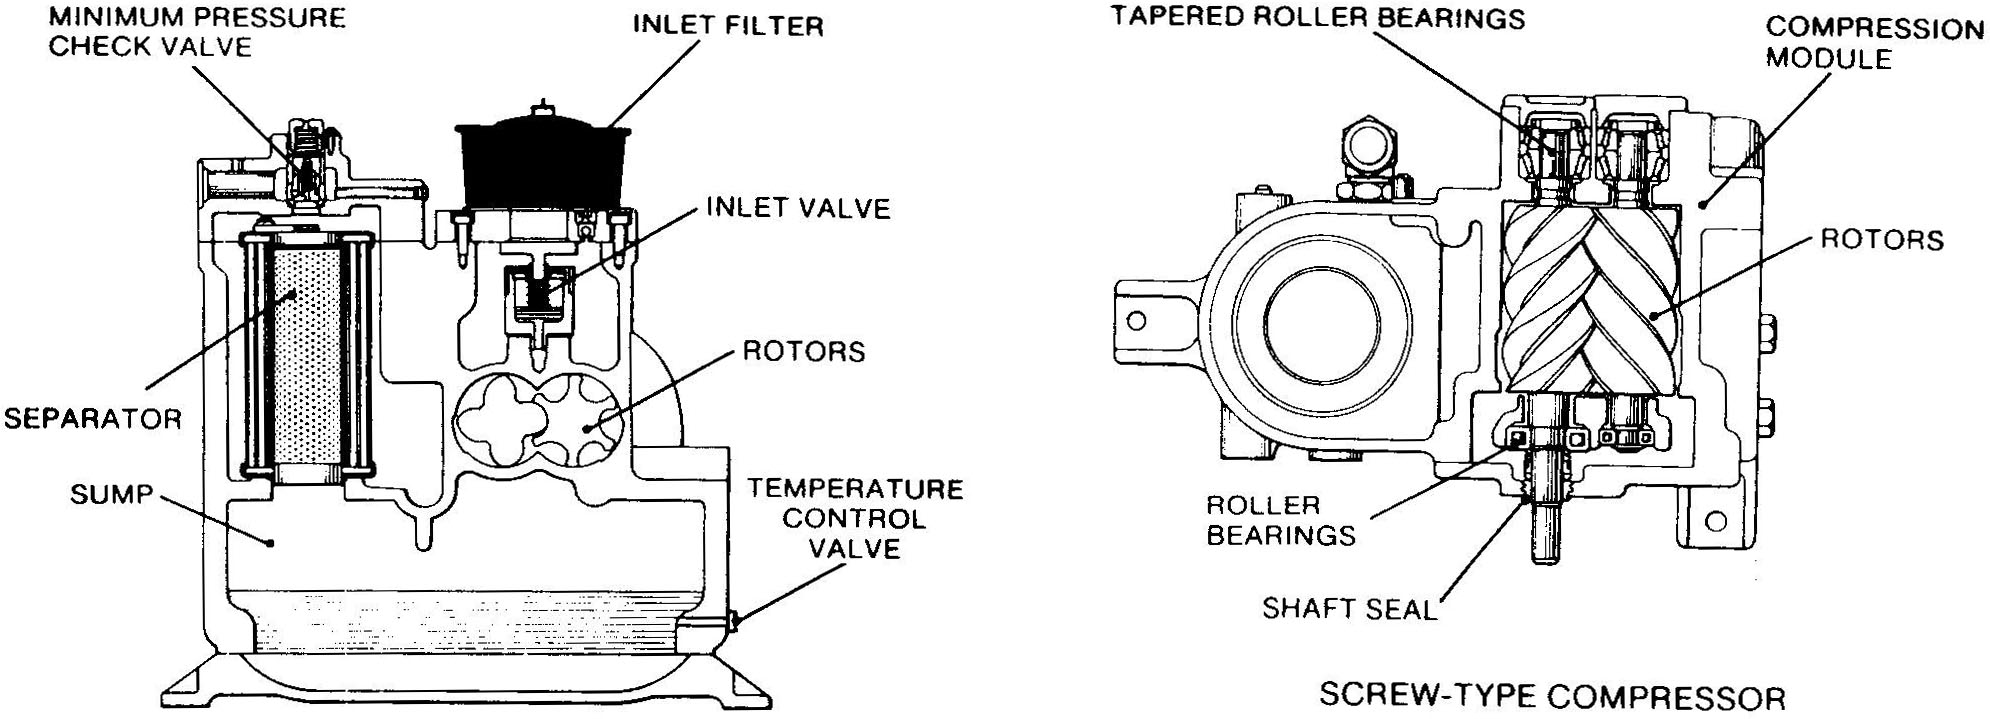 Air Compressor Valves Types, Functionality, and Maintenance